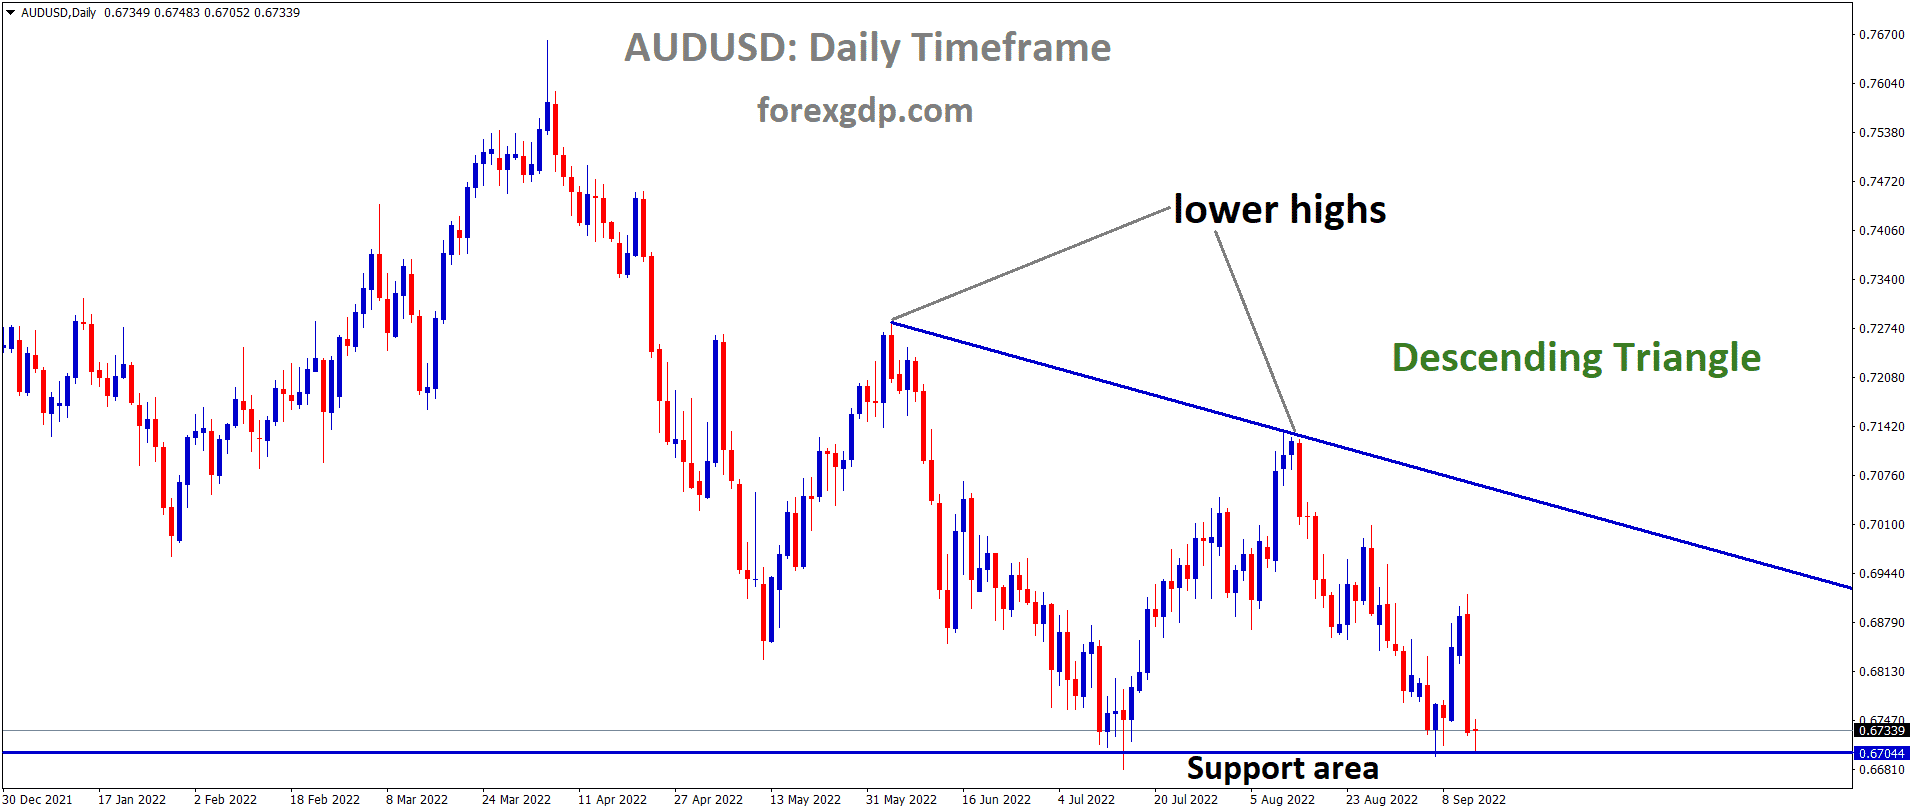 AUDUSD is moving in the Descending triangle pattern and the market has reached the horizontal support area of the pattern